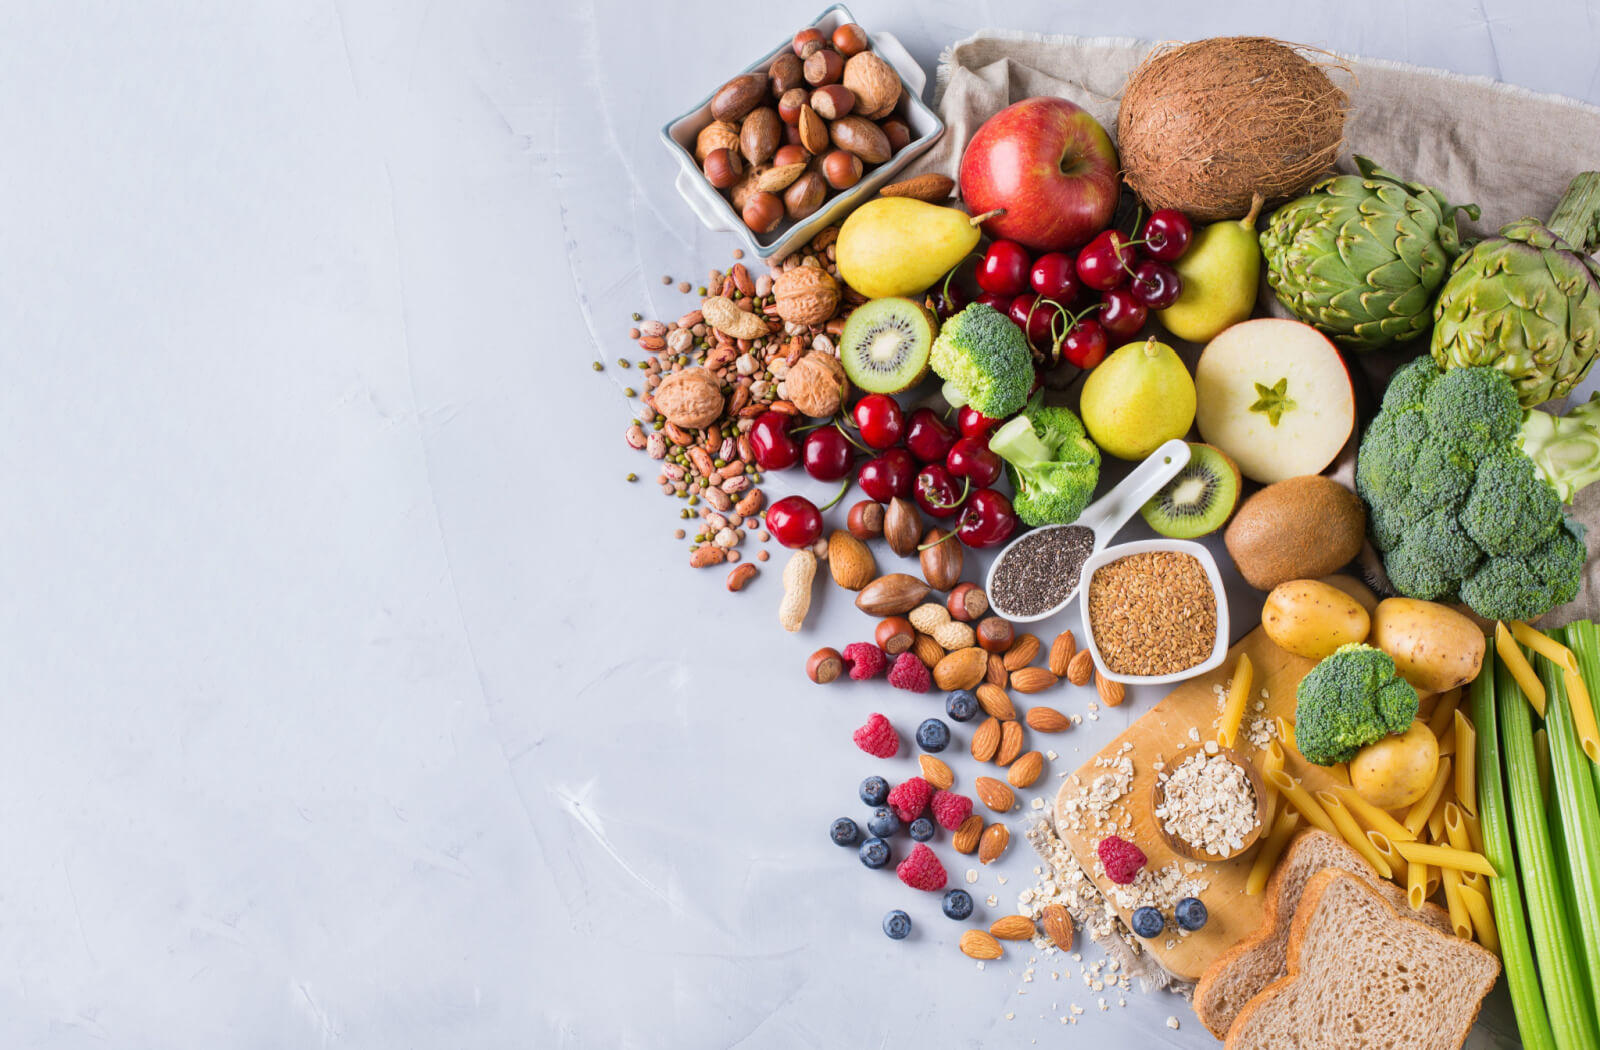 Selection of rich fibre sources of vegetables, fruits, grains, and bread.